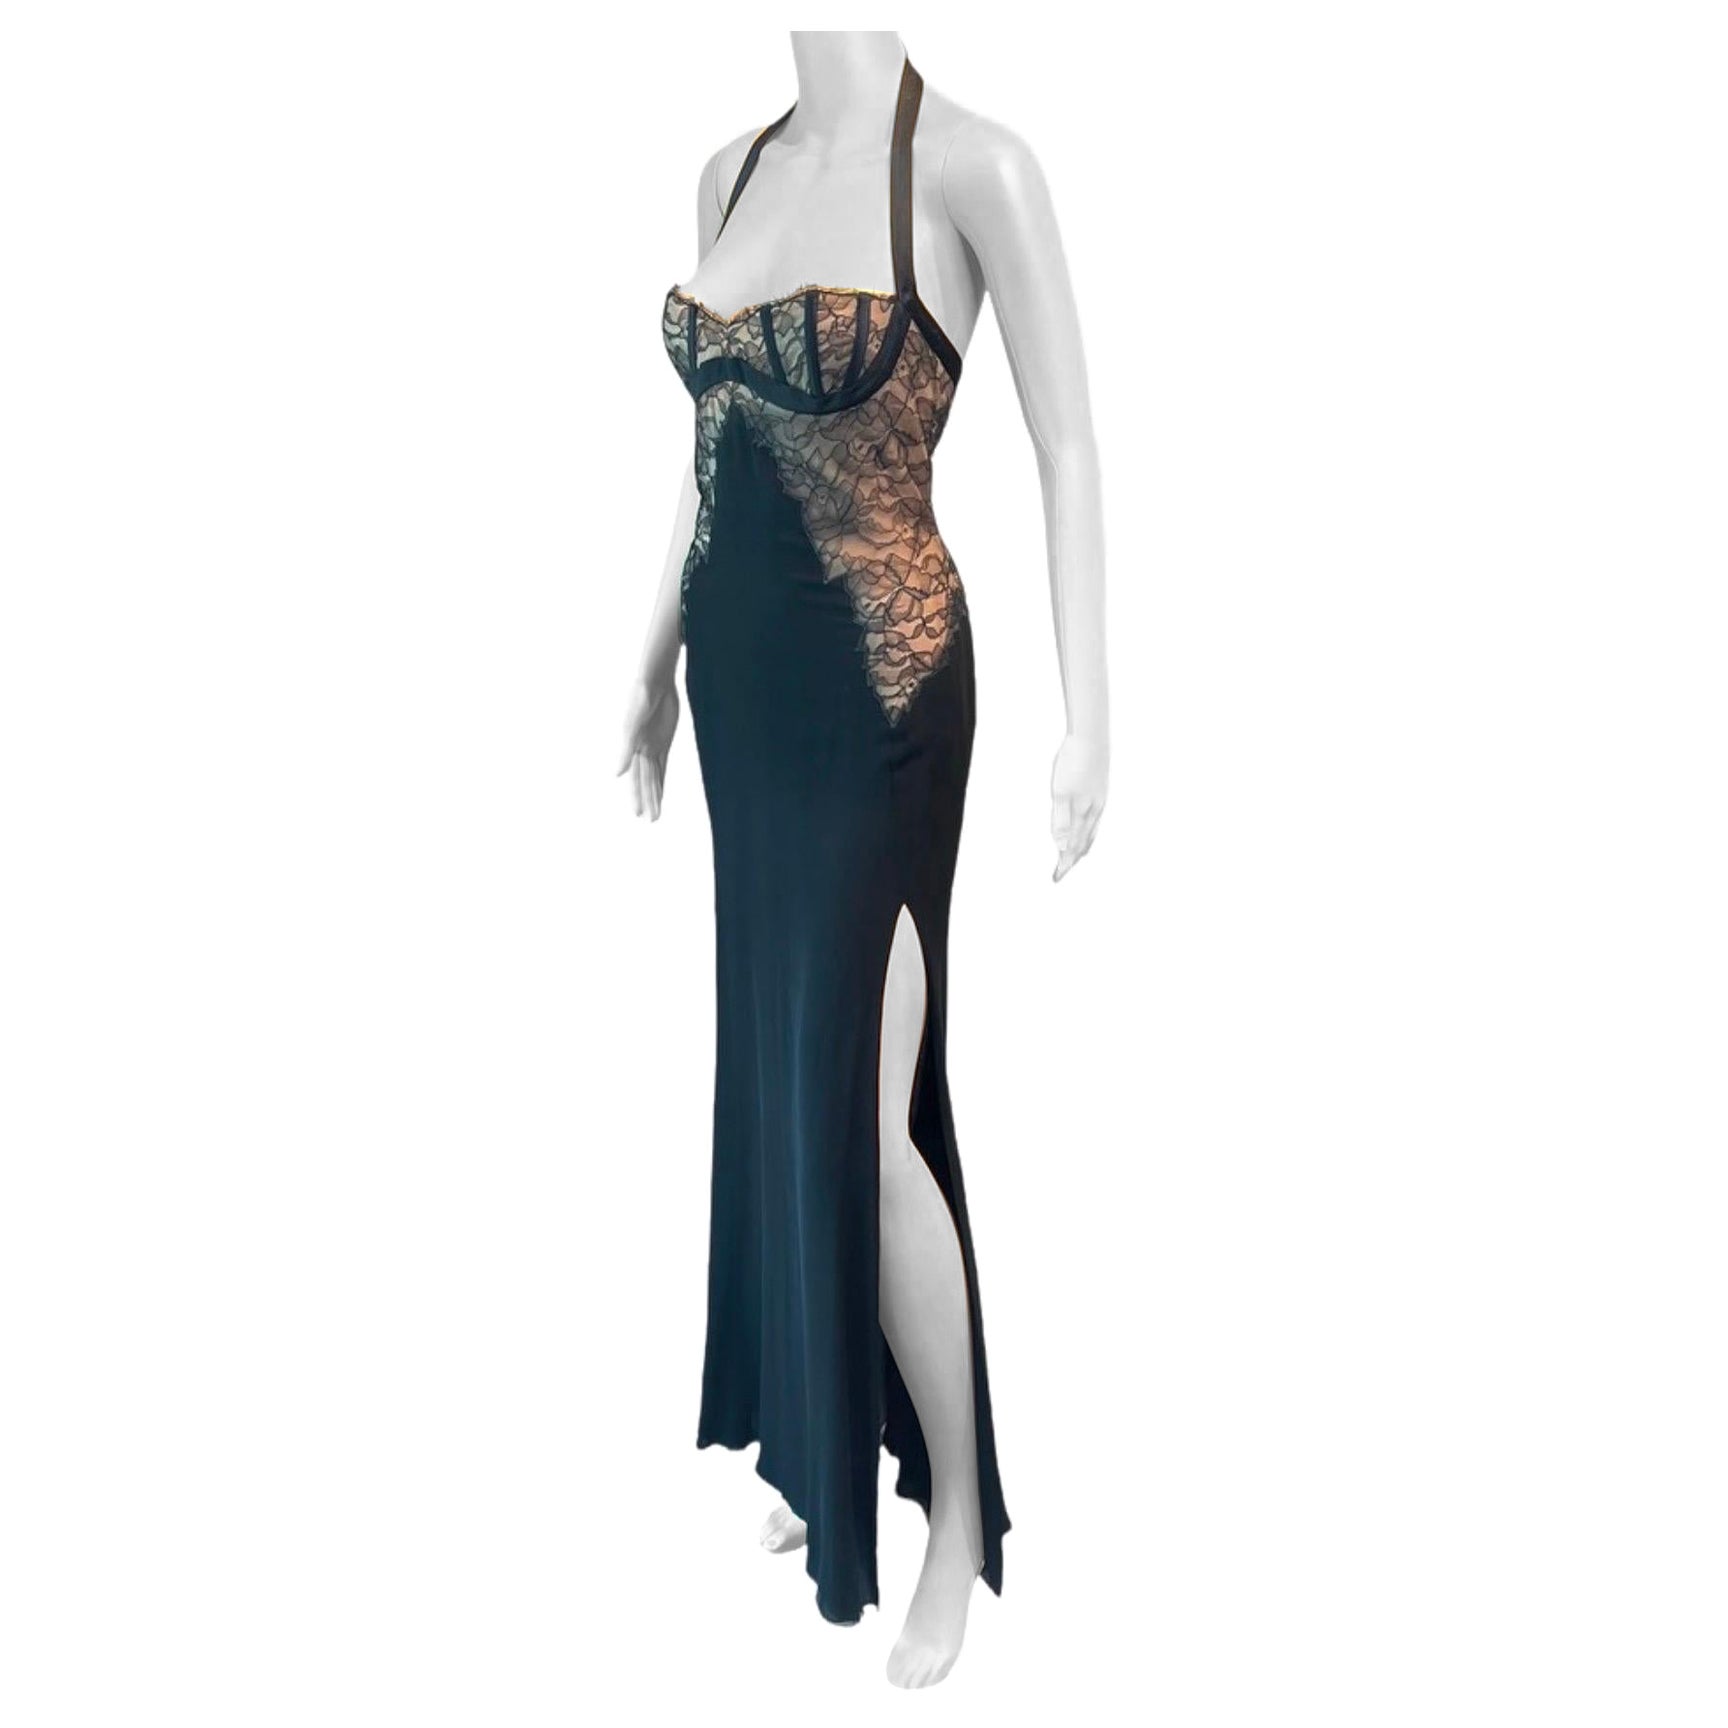 Gianni Versace S/S 1992 Bustier Lace Bra Sheer Panels Slit Evening Dress Gown For Sale